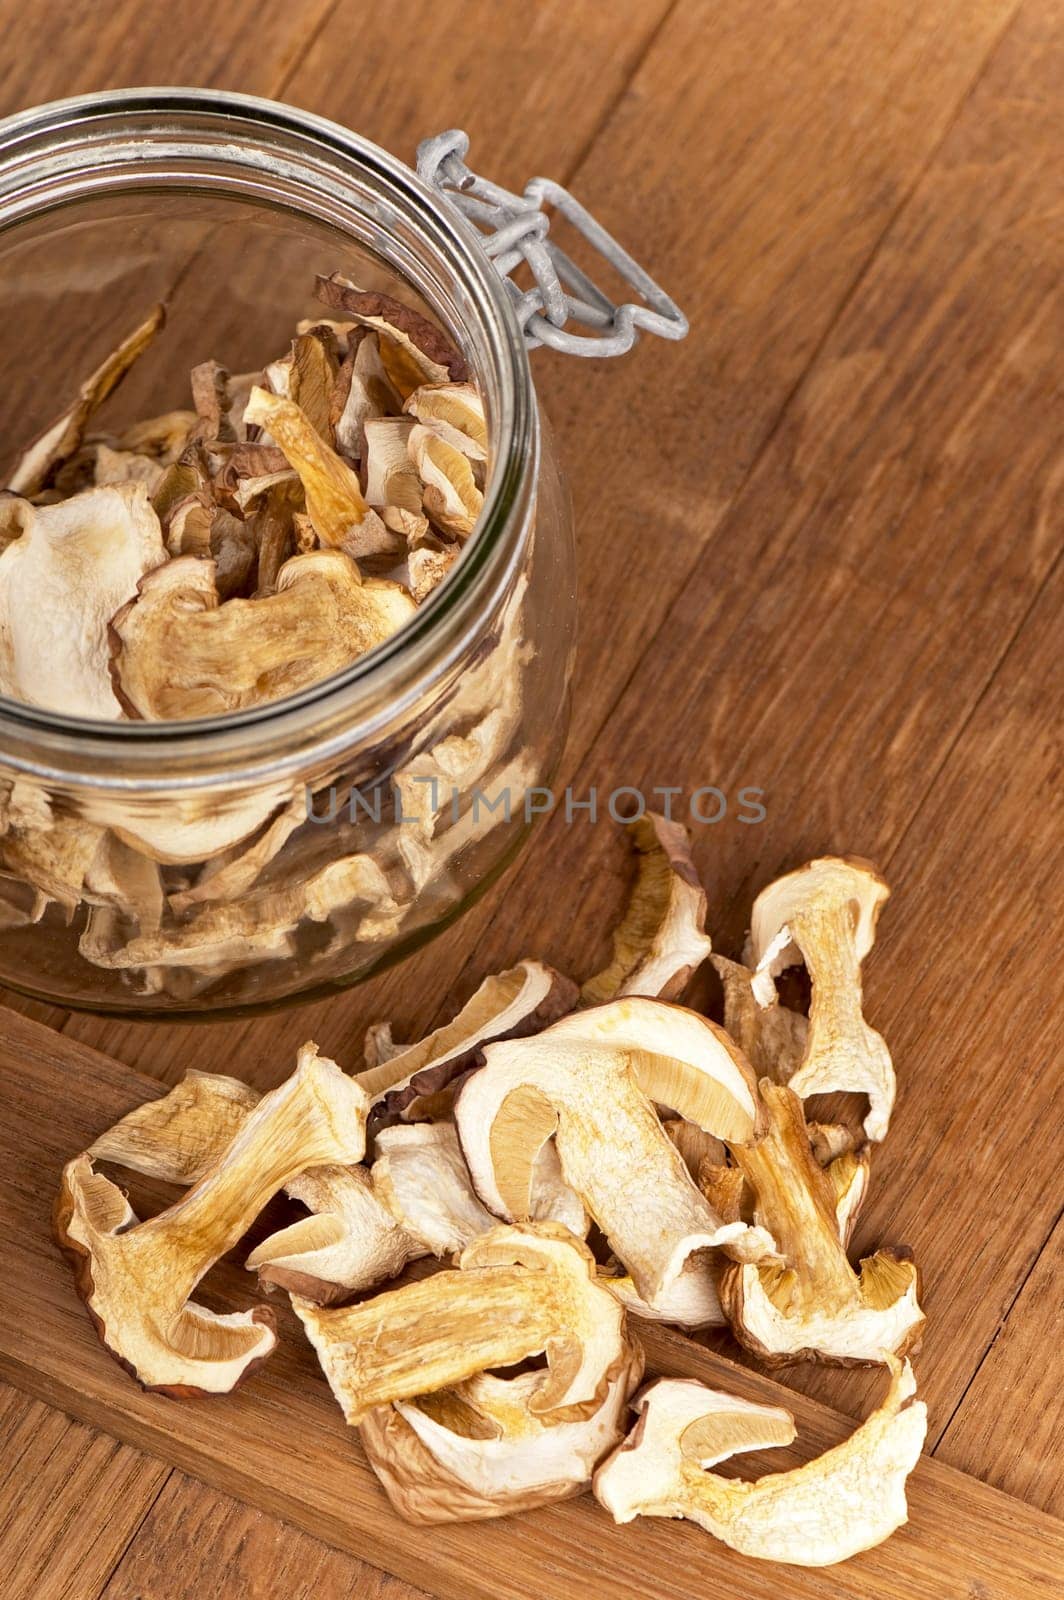 Dried Porcini Mushrooms On A Wooden Kitchen Table